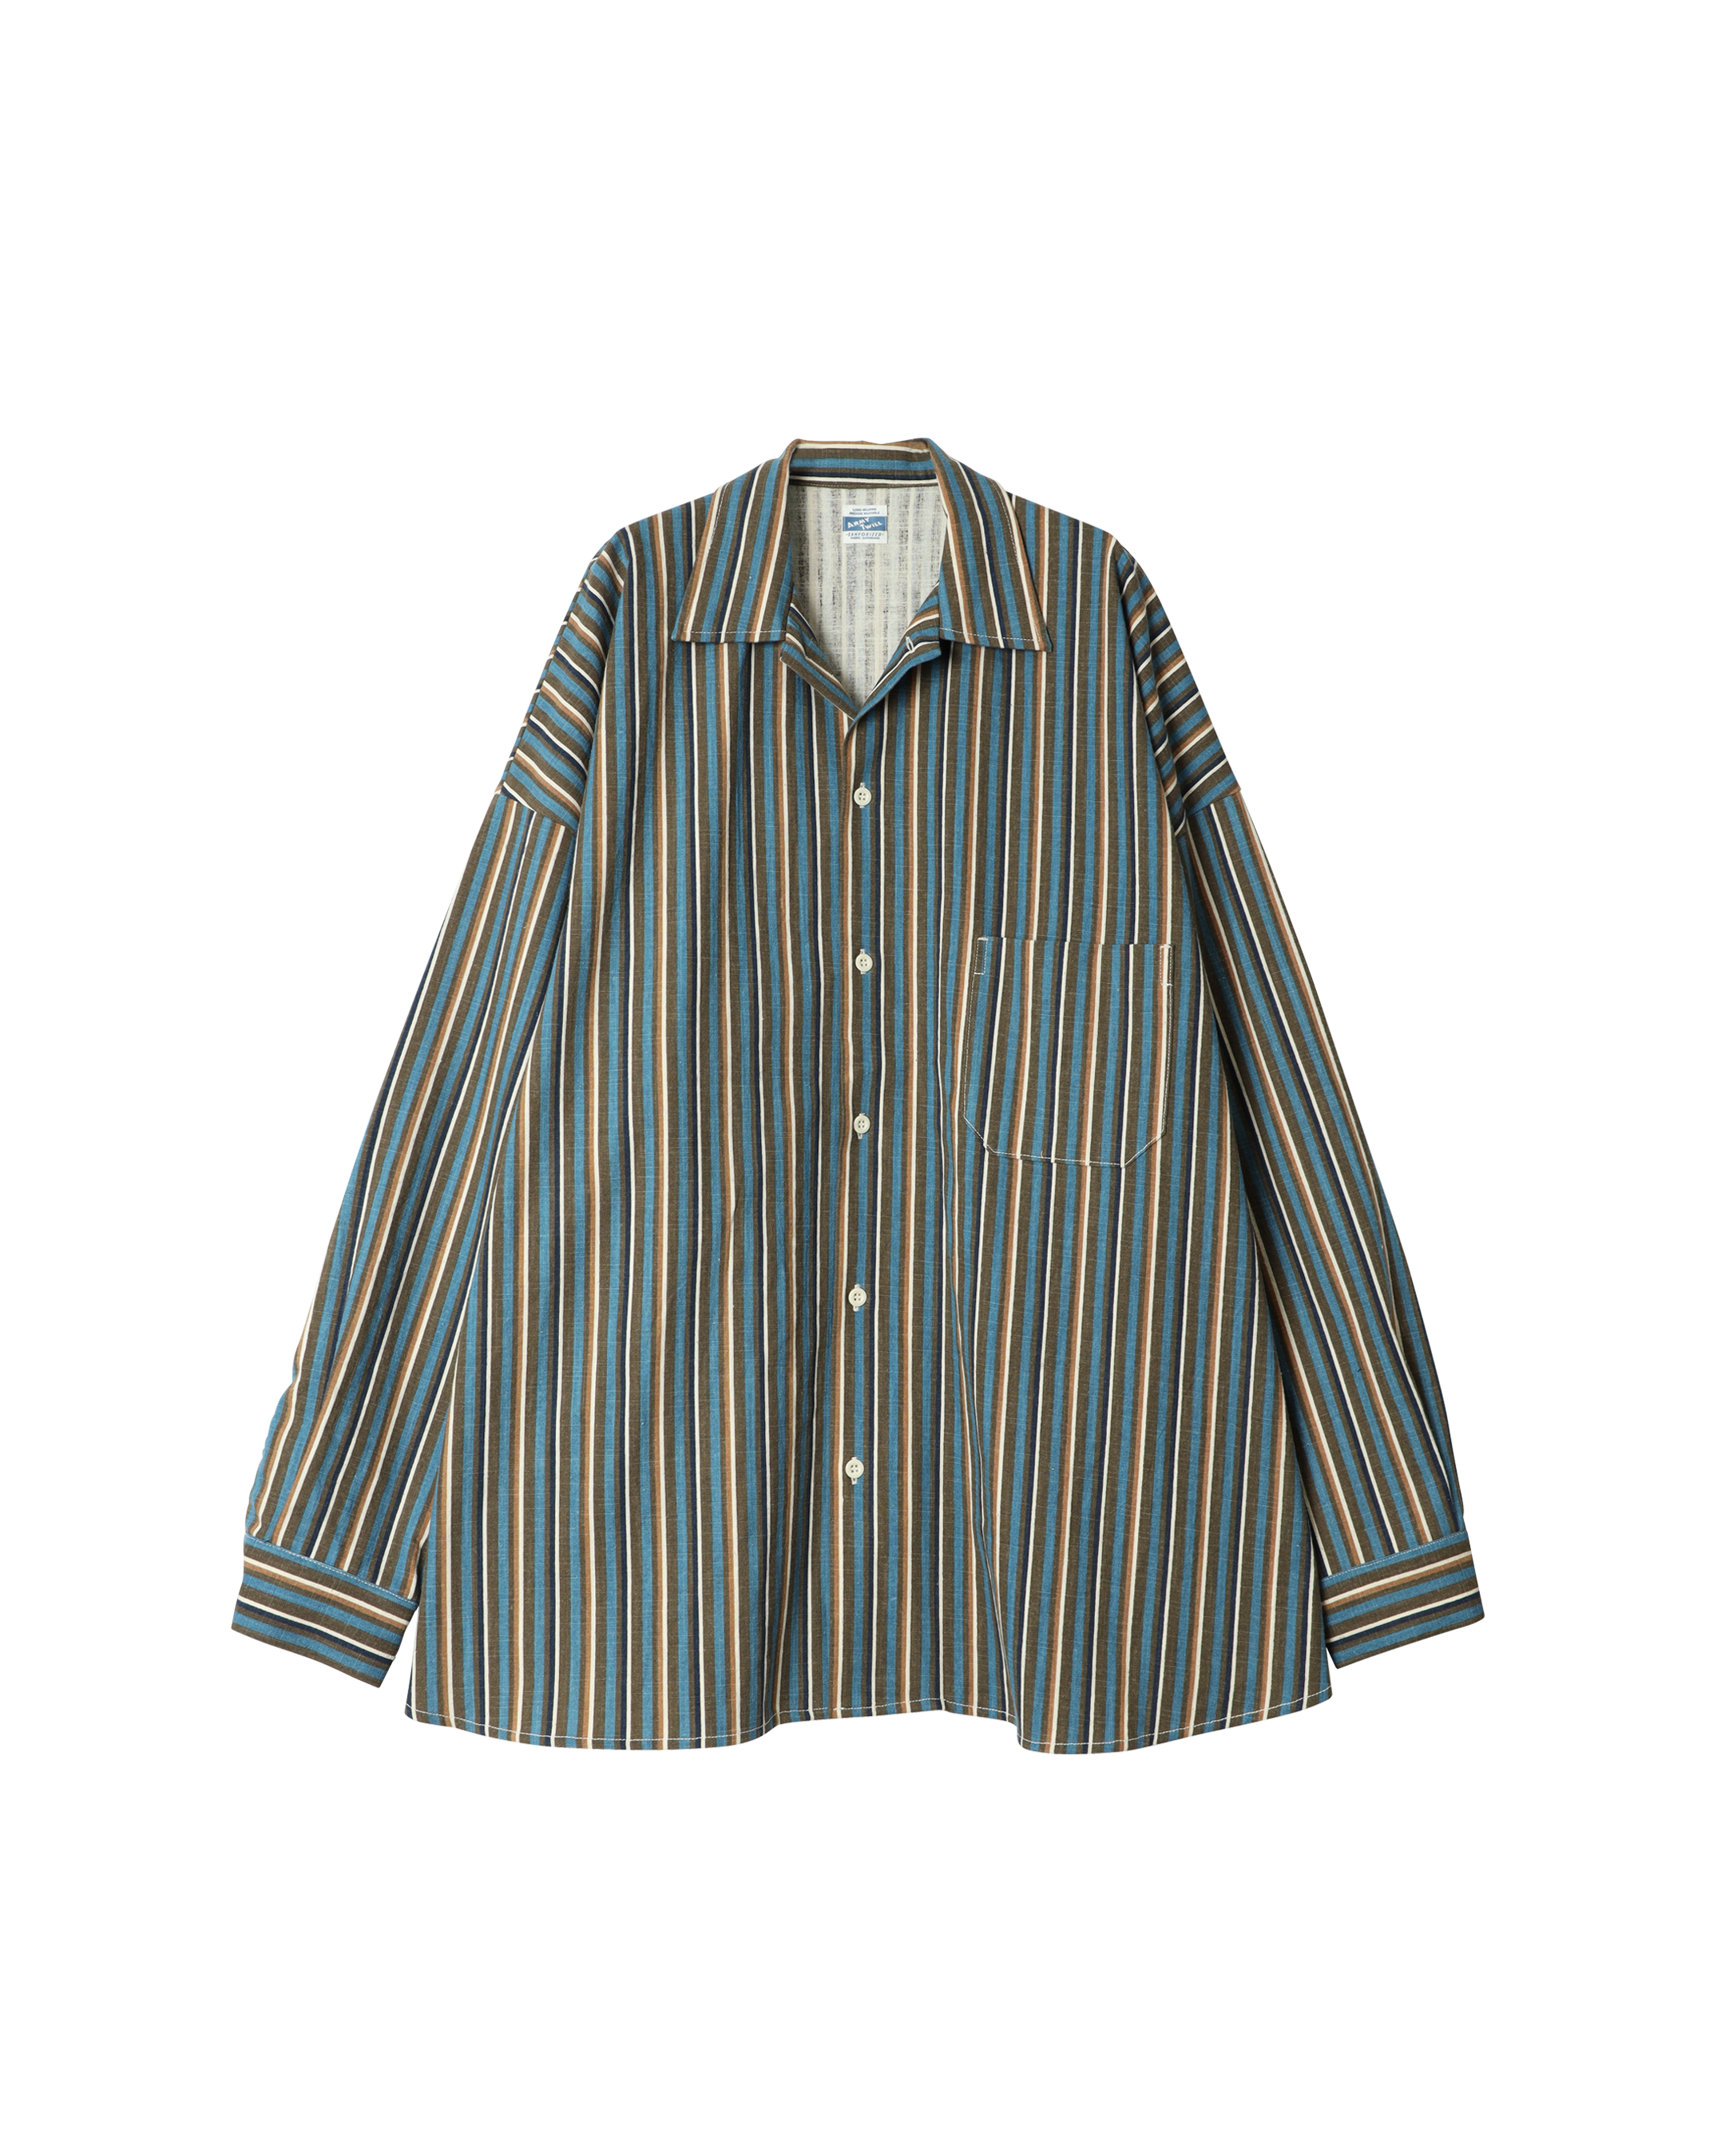 ARMY TWILL Stripe Stand Collor Shirts